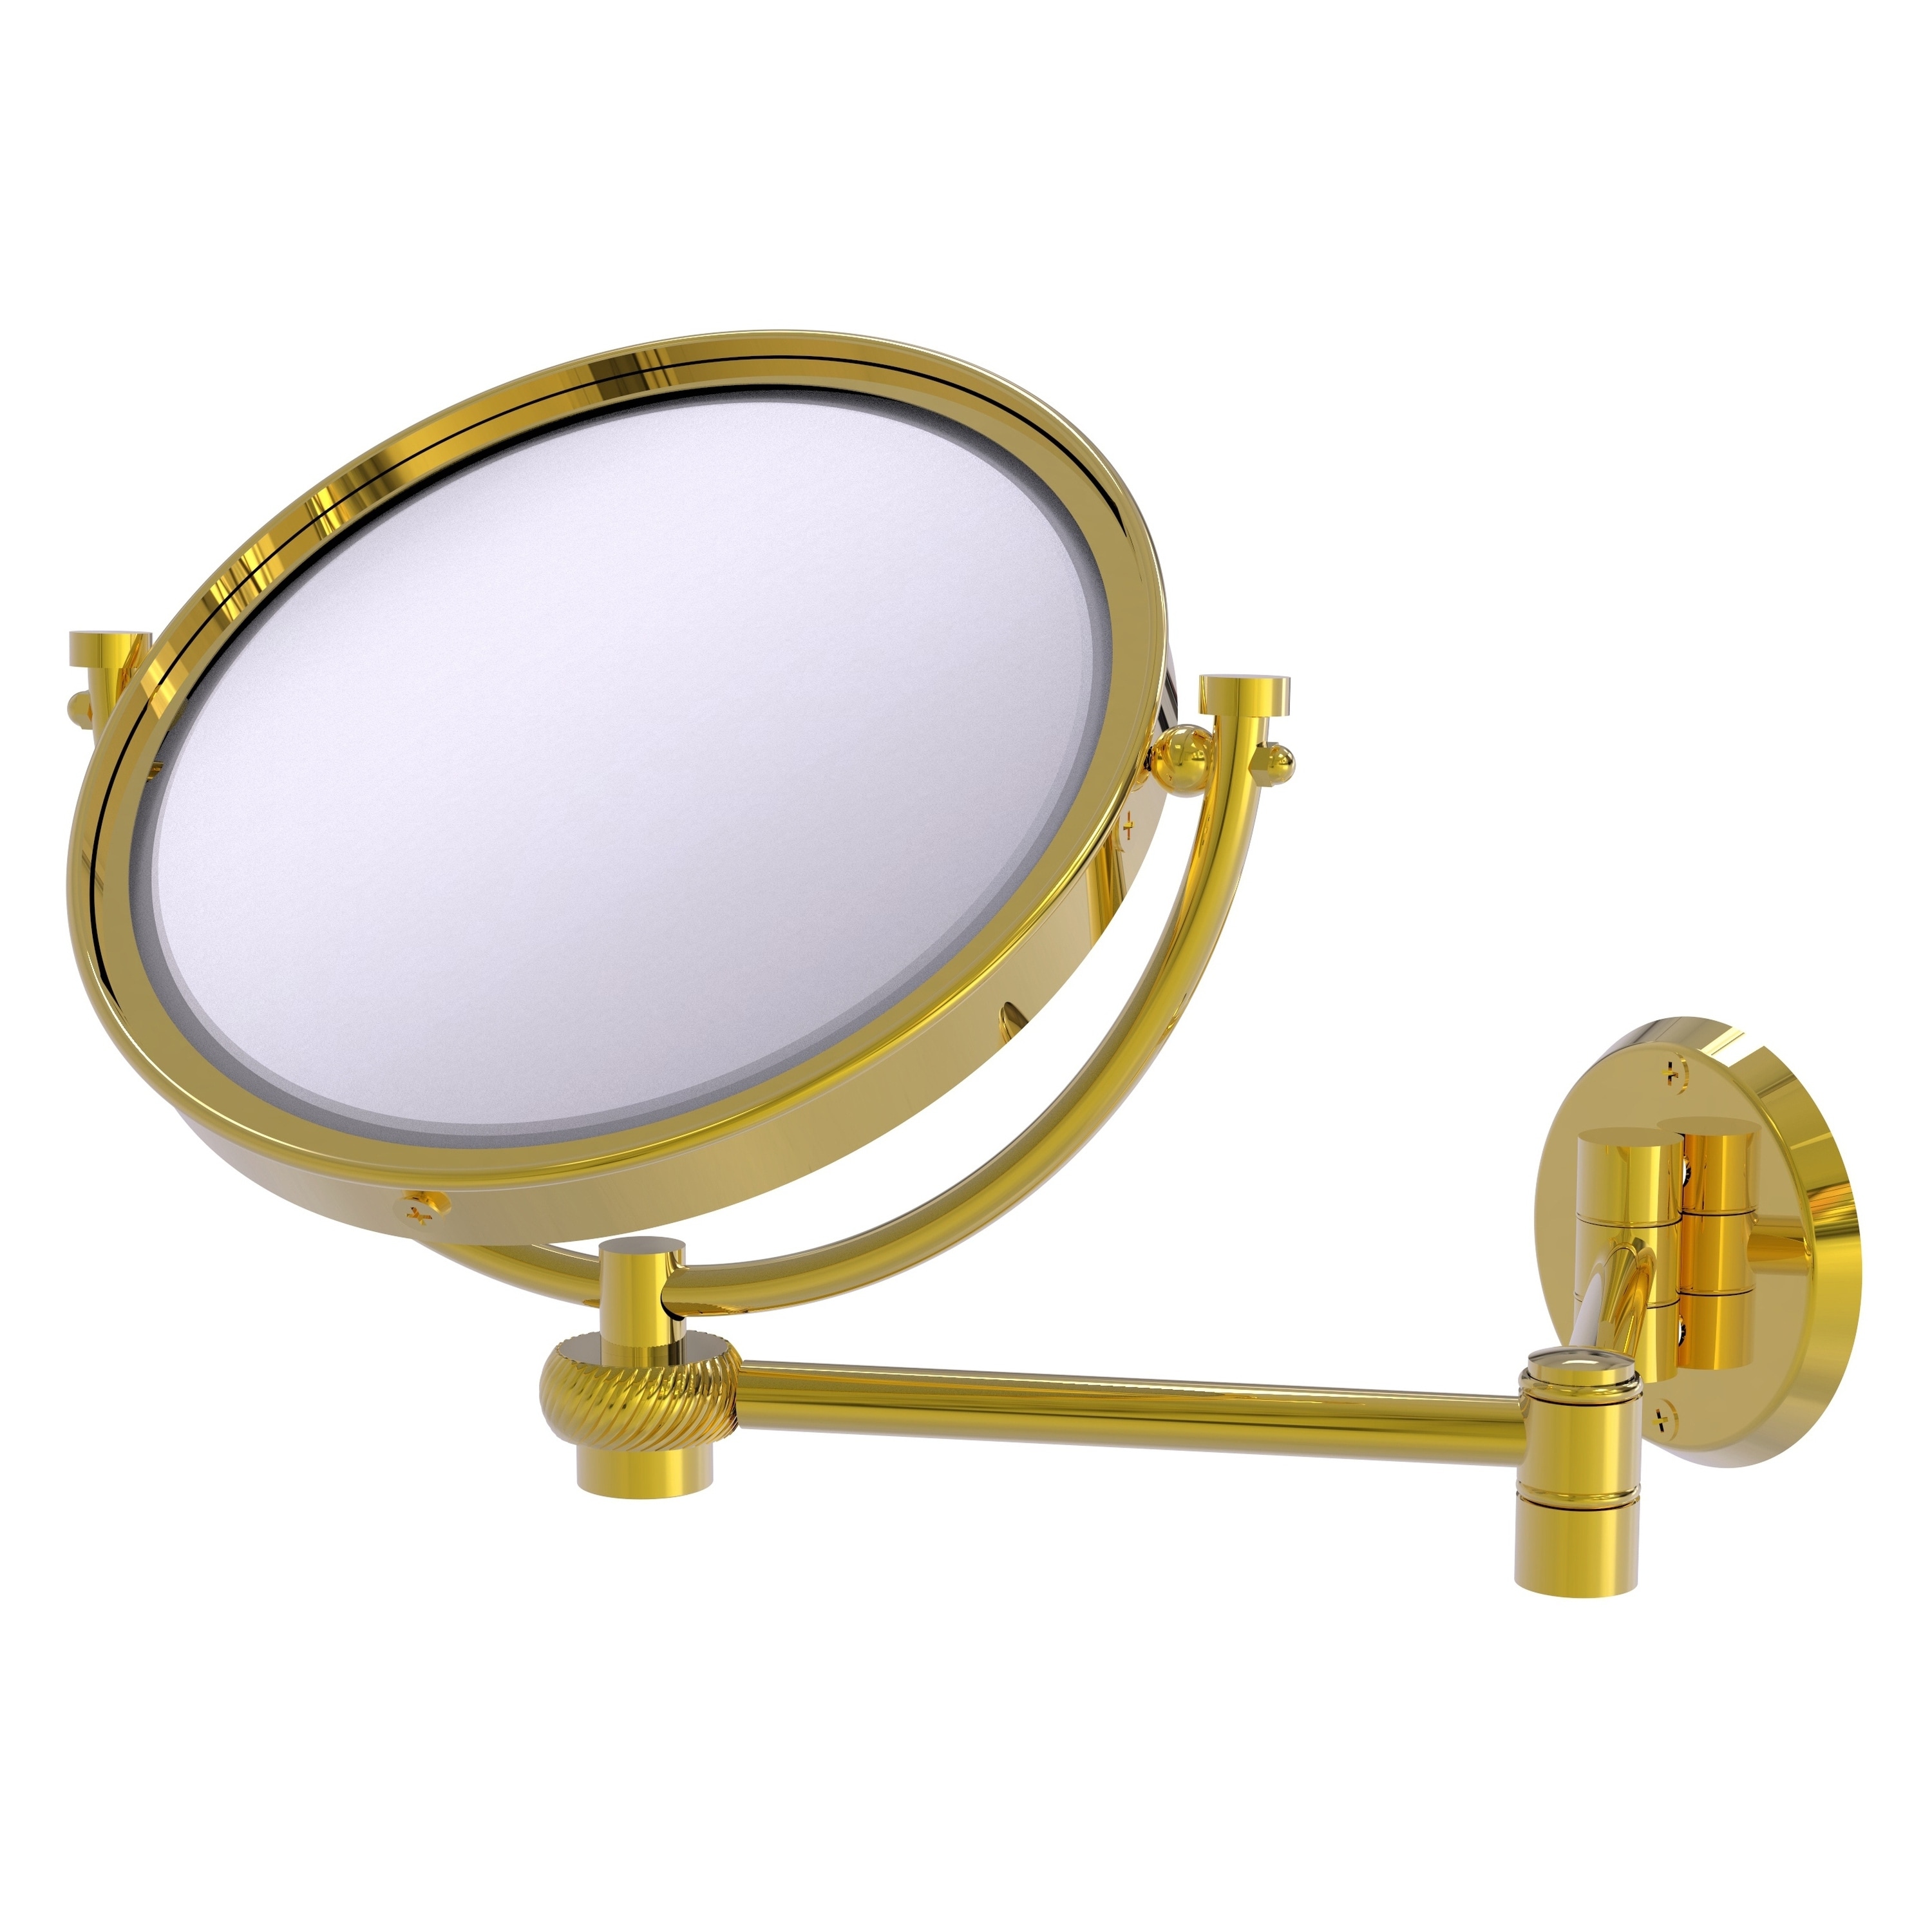 8-in x 10-in Polished Silver Double-sided 2X Magnifying Wall-mounted Vanity Mirror | - Allied Brass WM-6T/2X-PB